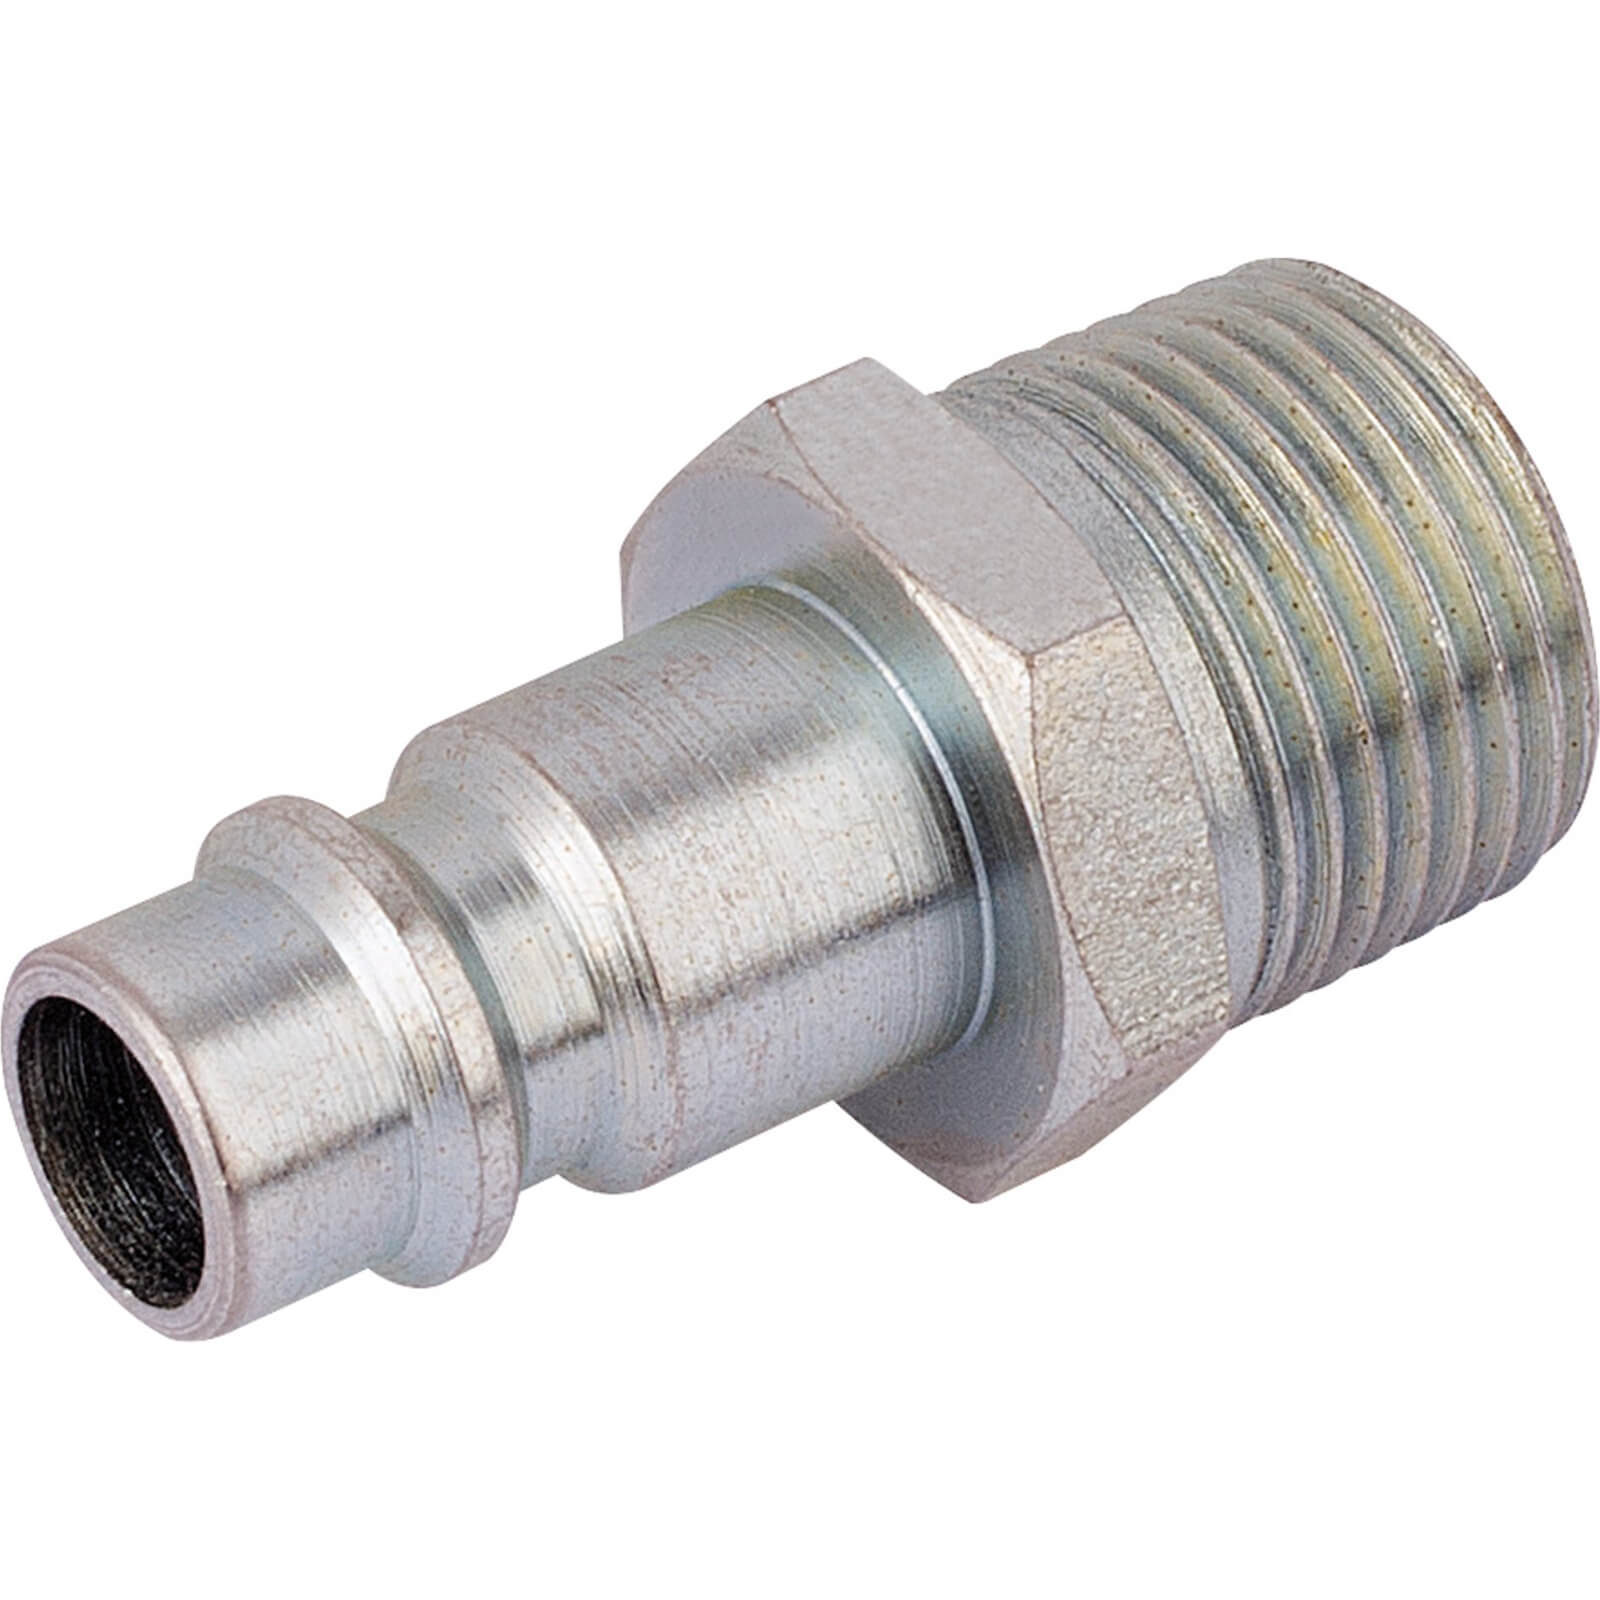 Image of Draper PCL Euro Male Nut Air Line Coupling Adaptor BSP Male Thread 3/8" BSP